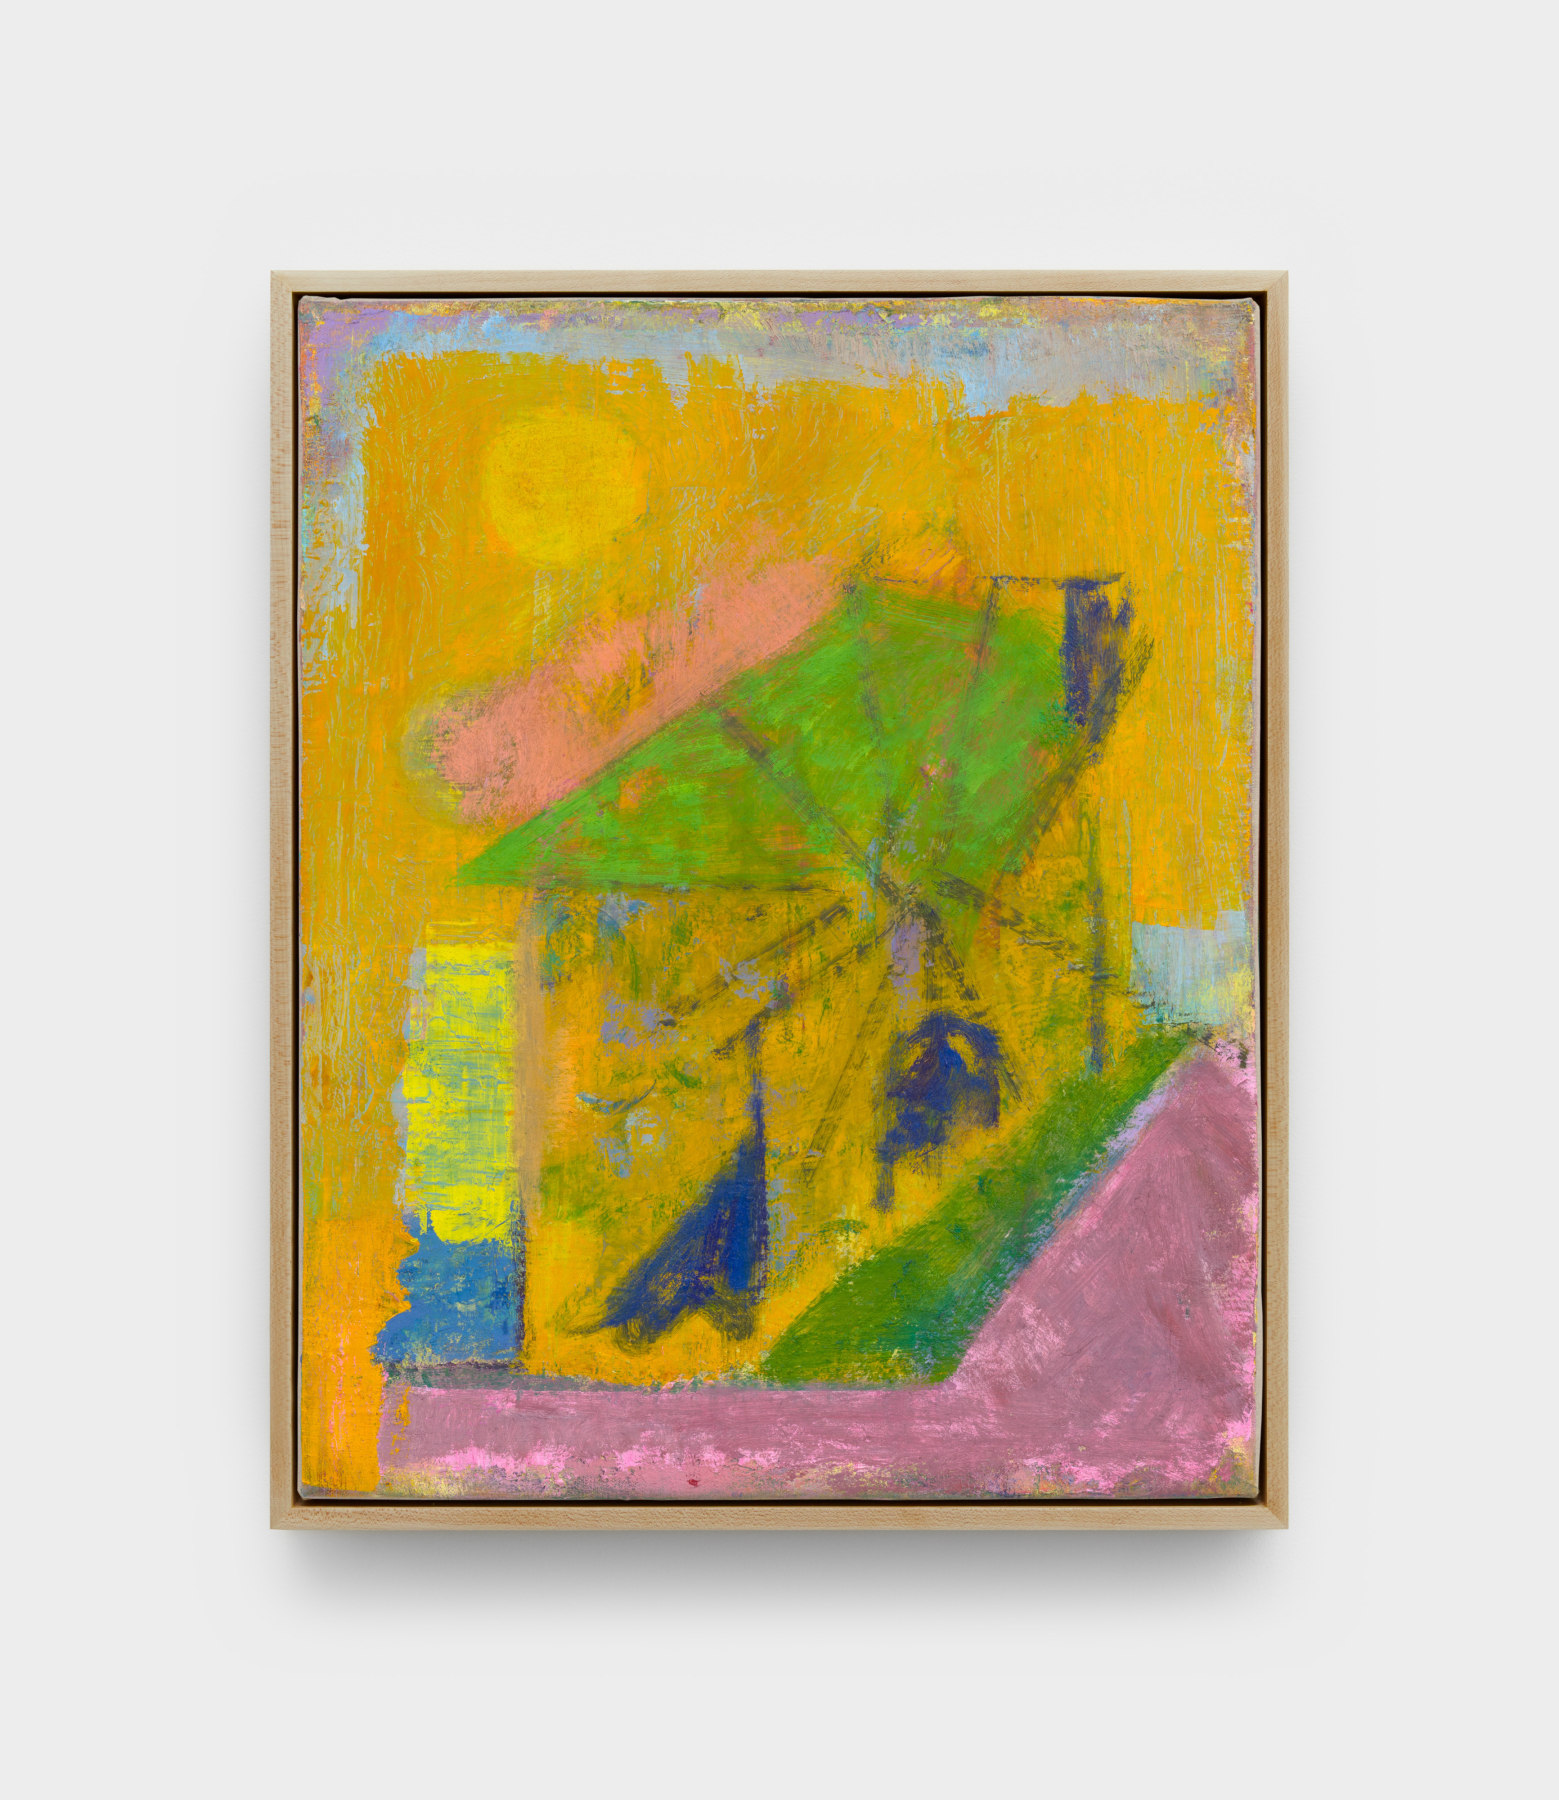 A painting by Michael Berryhill titled "Diane Drive," which shows an abstractly rendered yellow house-like structure and sun.